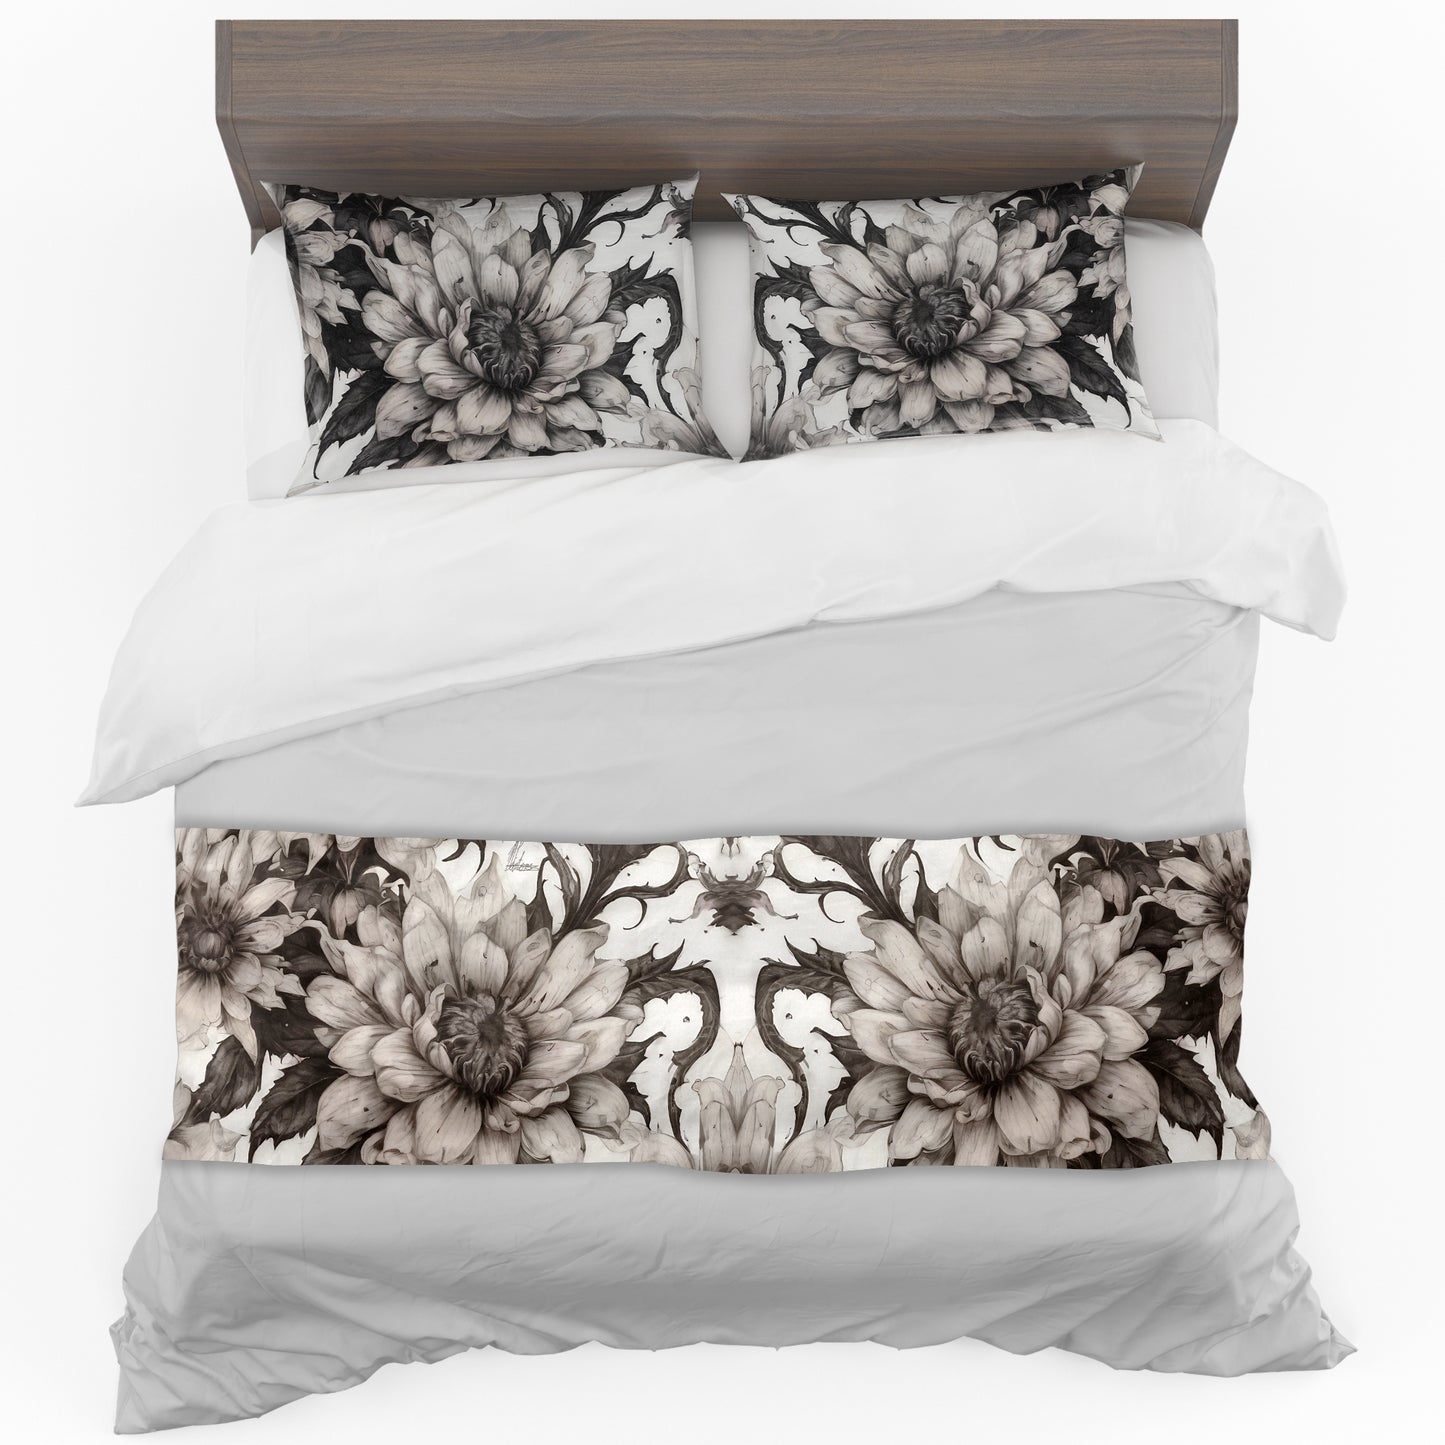 Midnight Garden Flowers By Nathan Pieterse Bed Runner and Optional Pillowcases